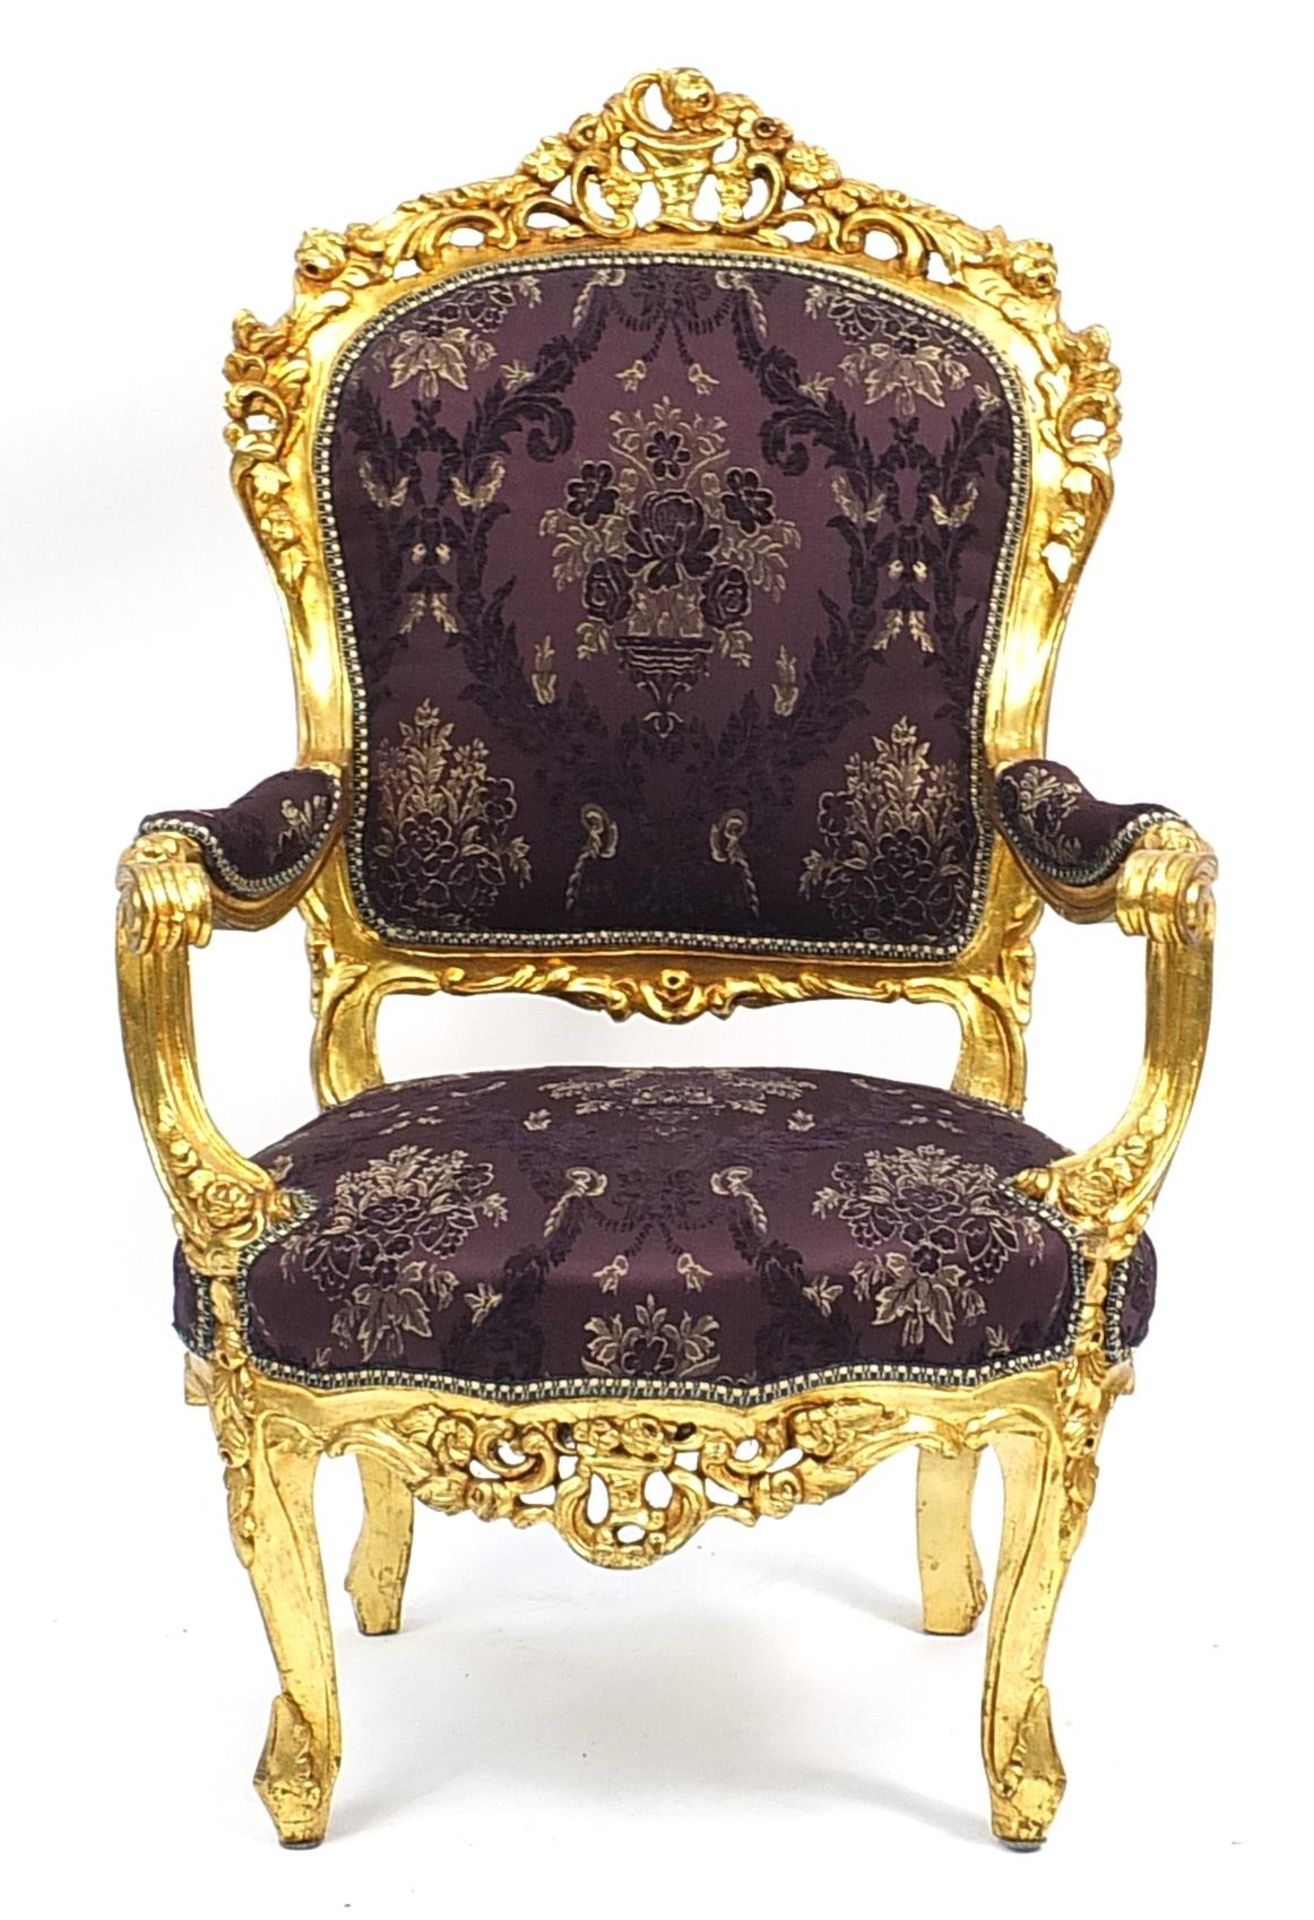 Ornate French style giltwood open armchair with purple floral upholstery, 112cm high - Image 2 of 3